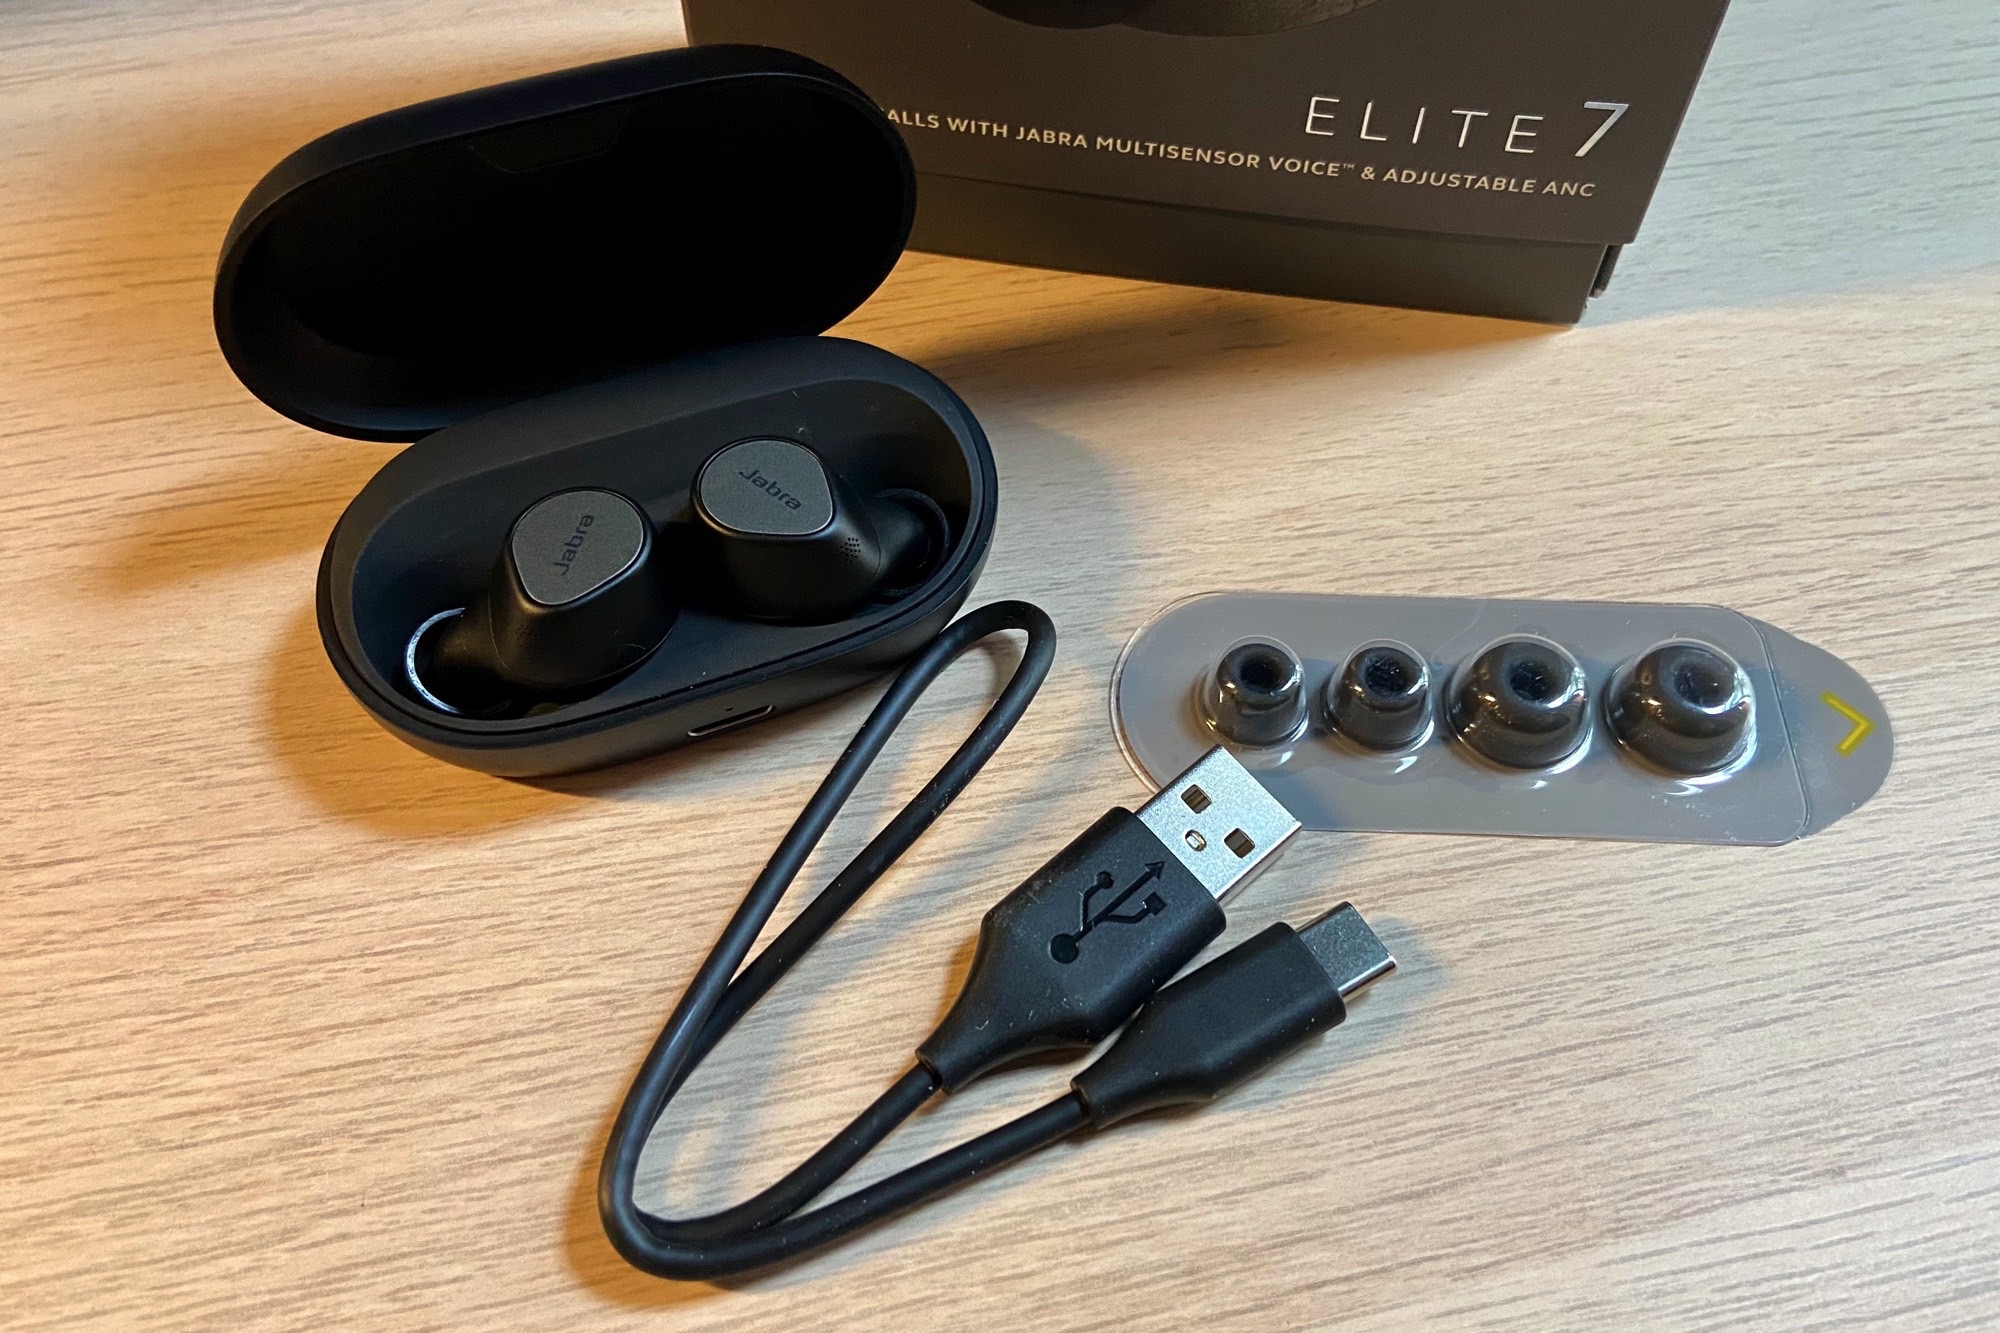 Jabra Elite 7 Pro ANC earbuds are worth top dollar but cost less [Review]